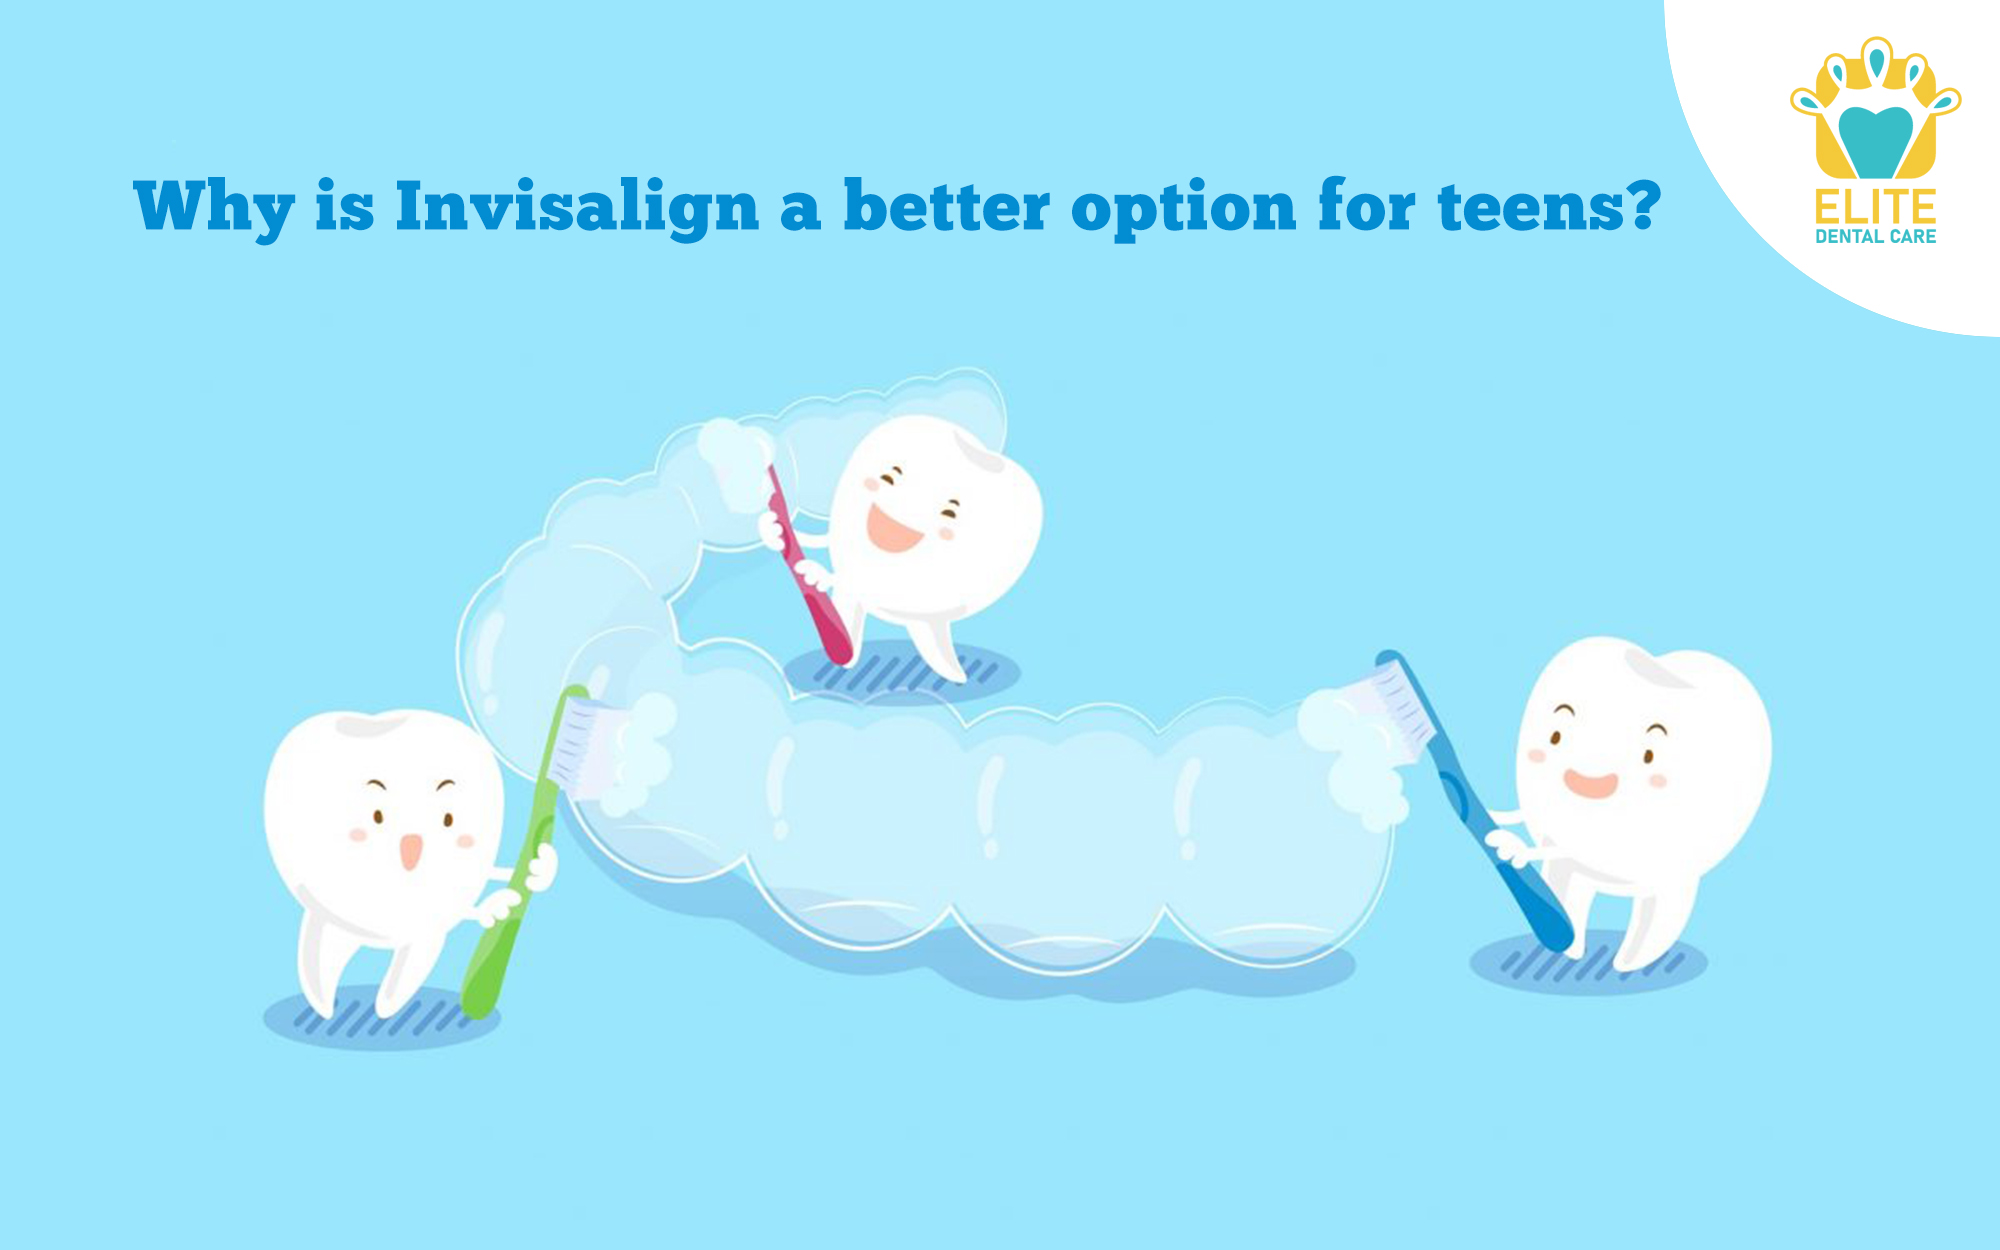 WHY IS INVISALIGN A BETTER OPTION FOR TEENS?